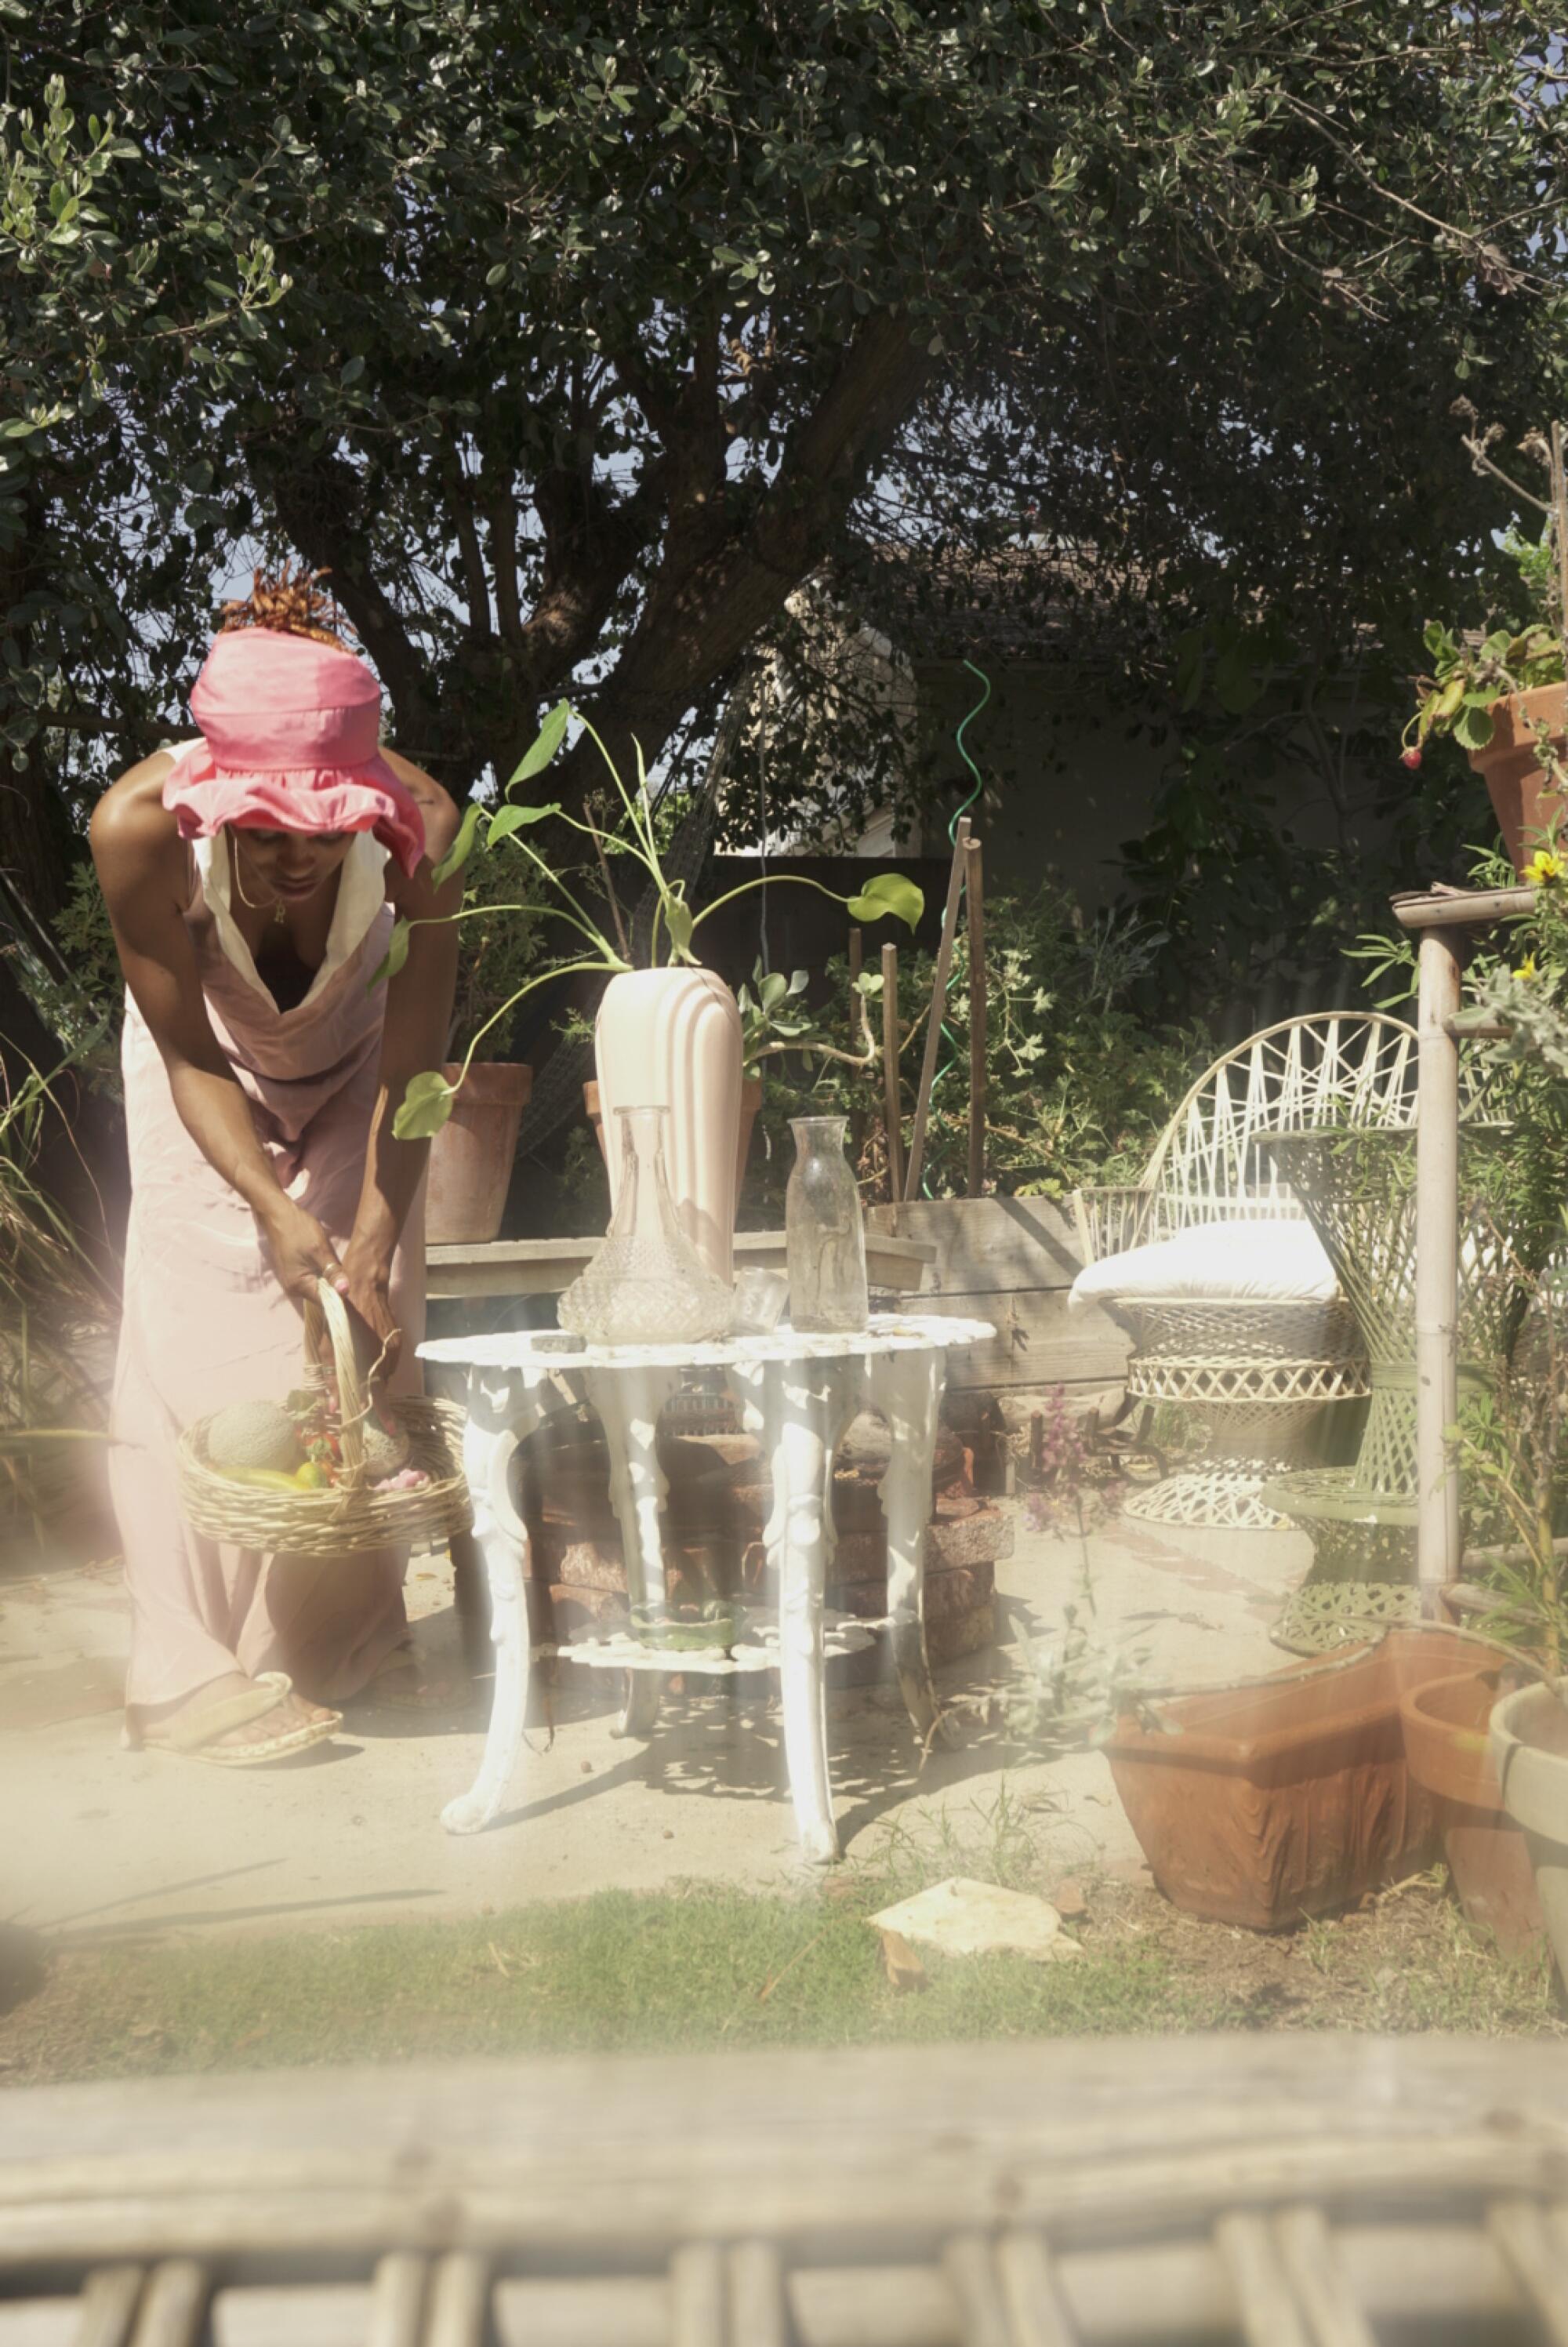 A woman holding a basket tends to her garden.